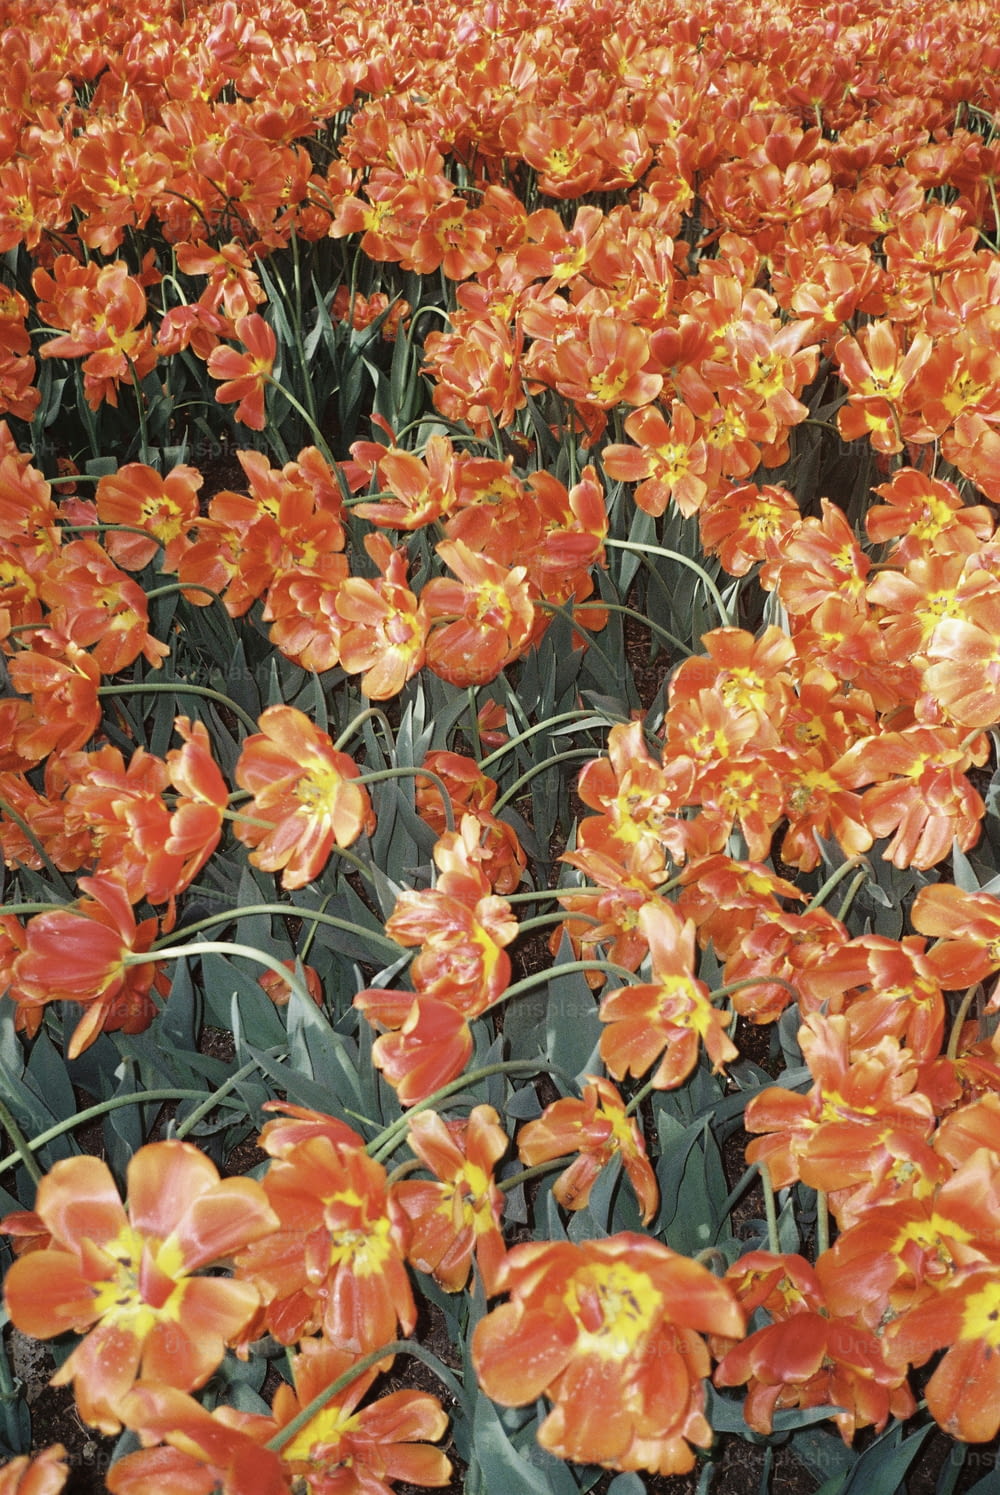 a large field of orange flowers with yellow centers